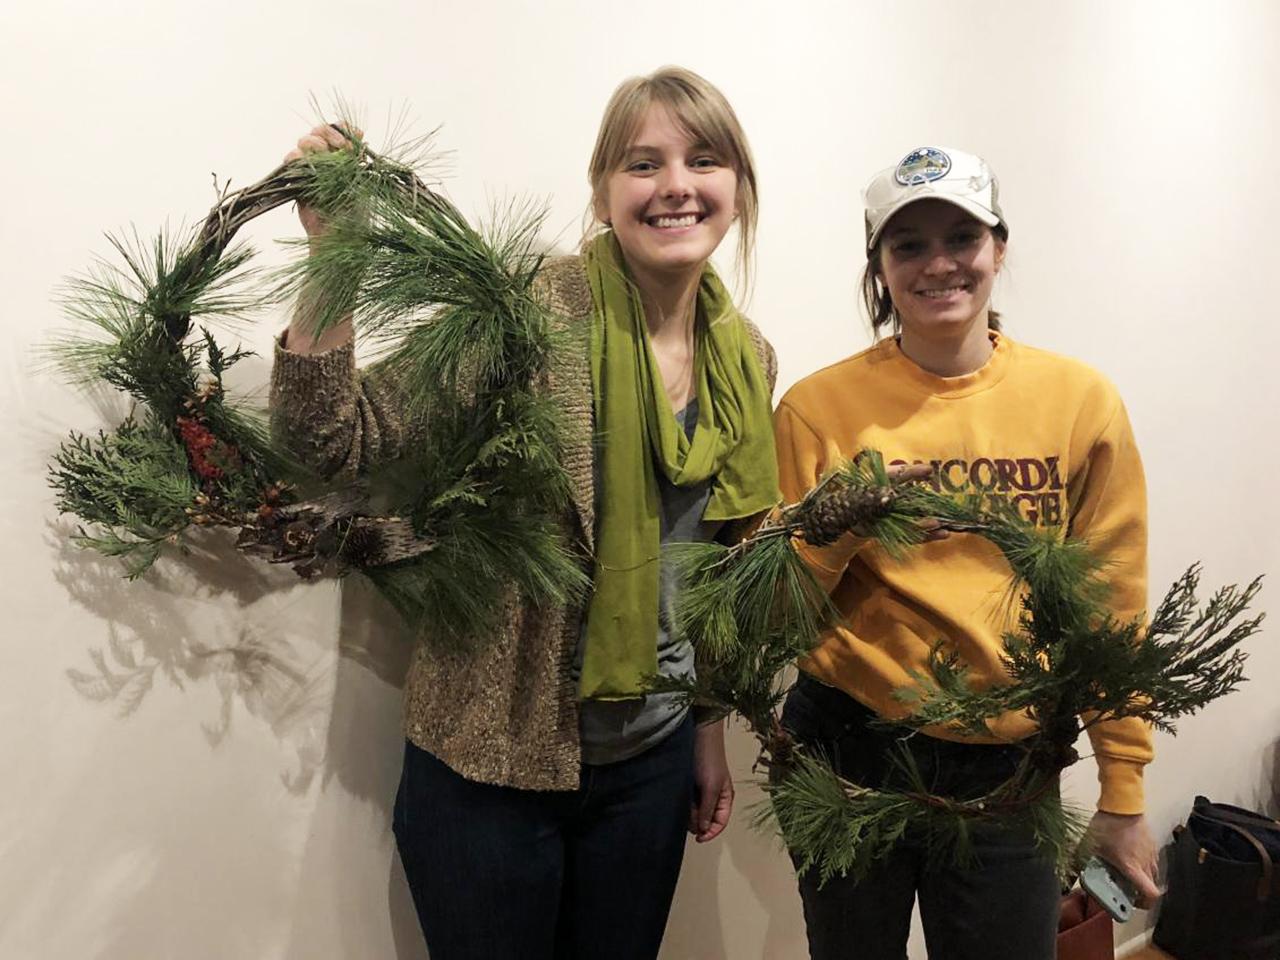 Event participants with buckthorn wreaths